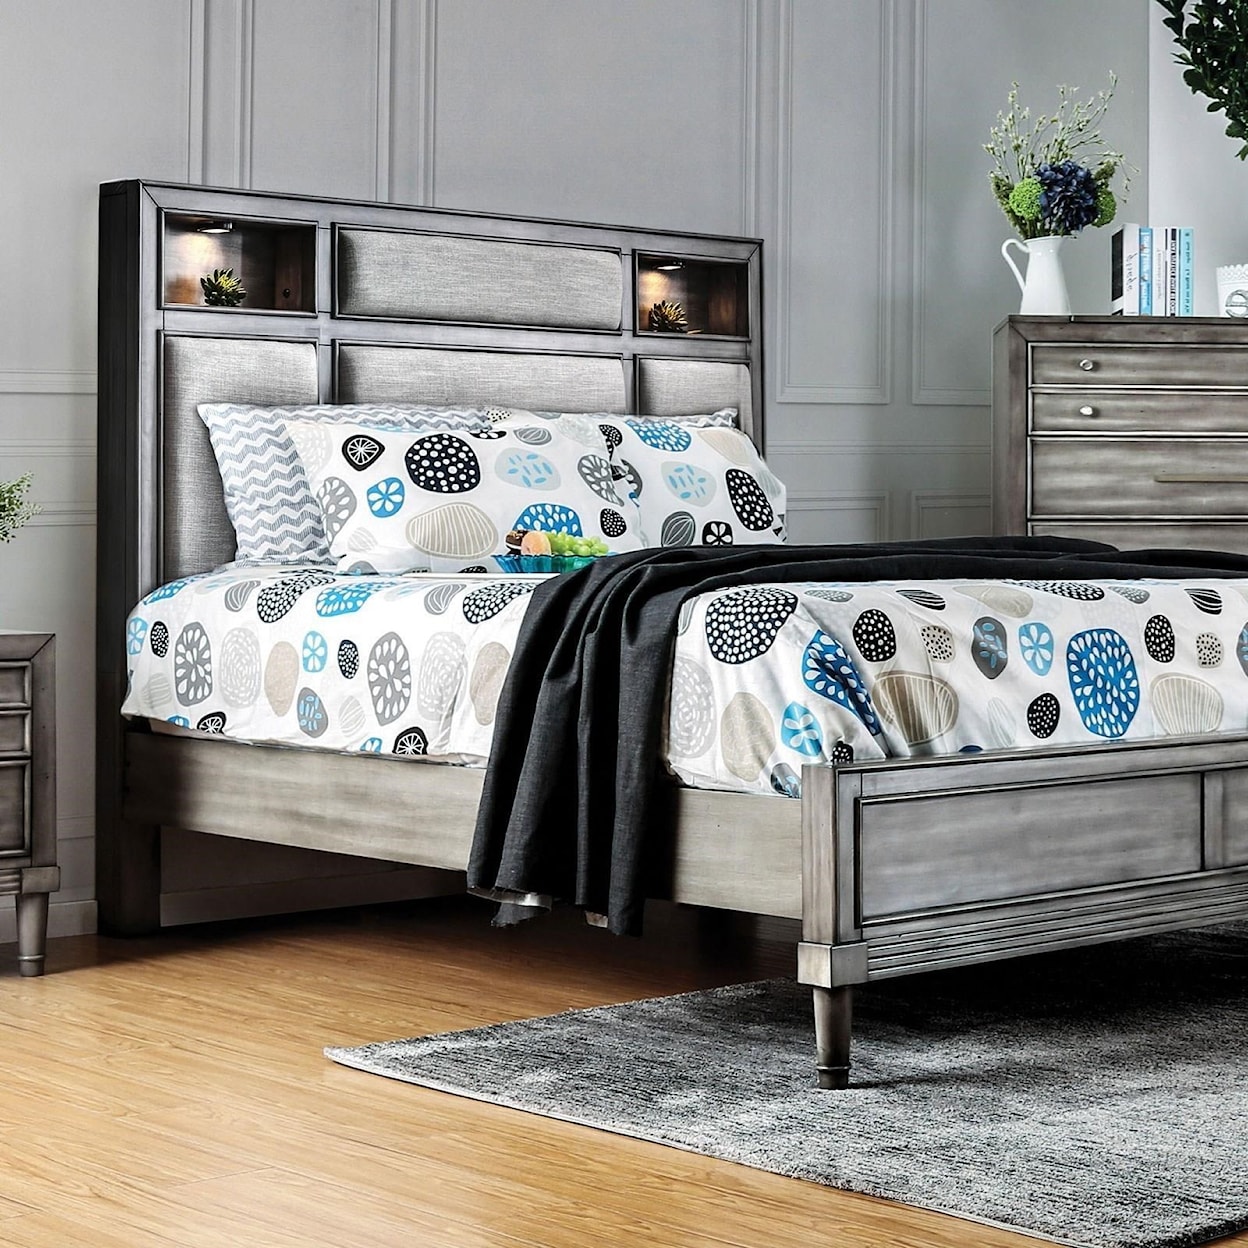 Furniture of America Daphne Queen Bed